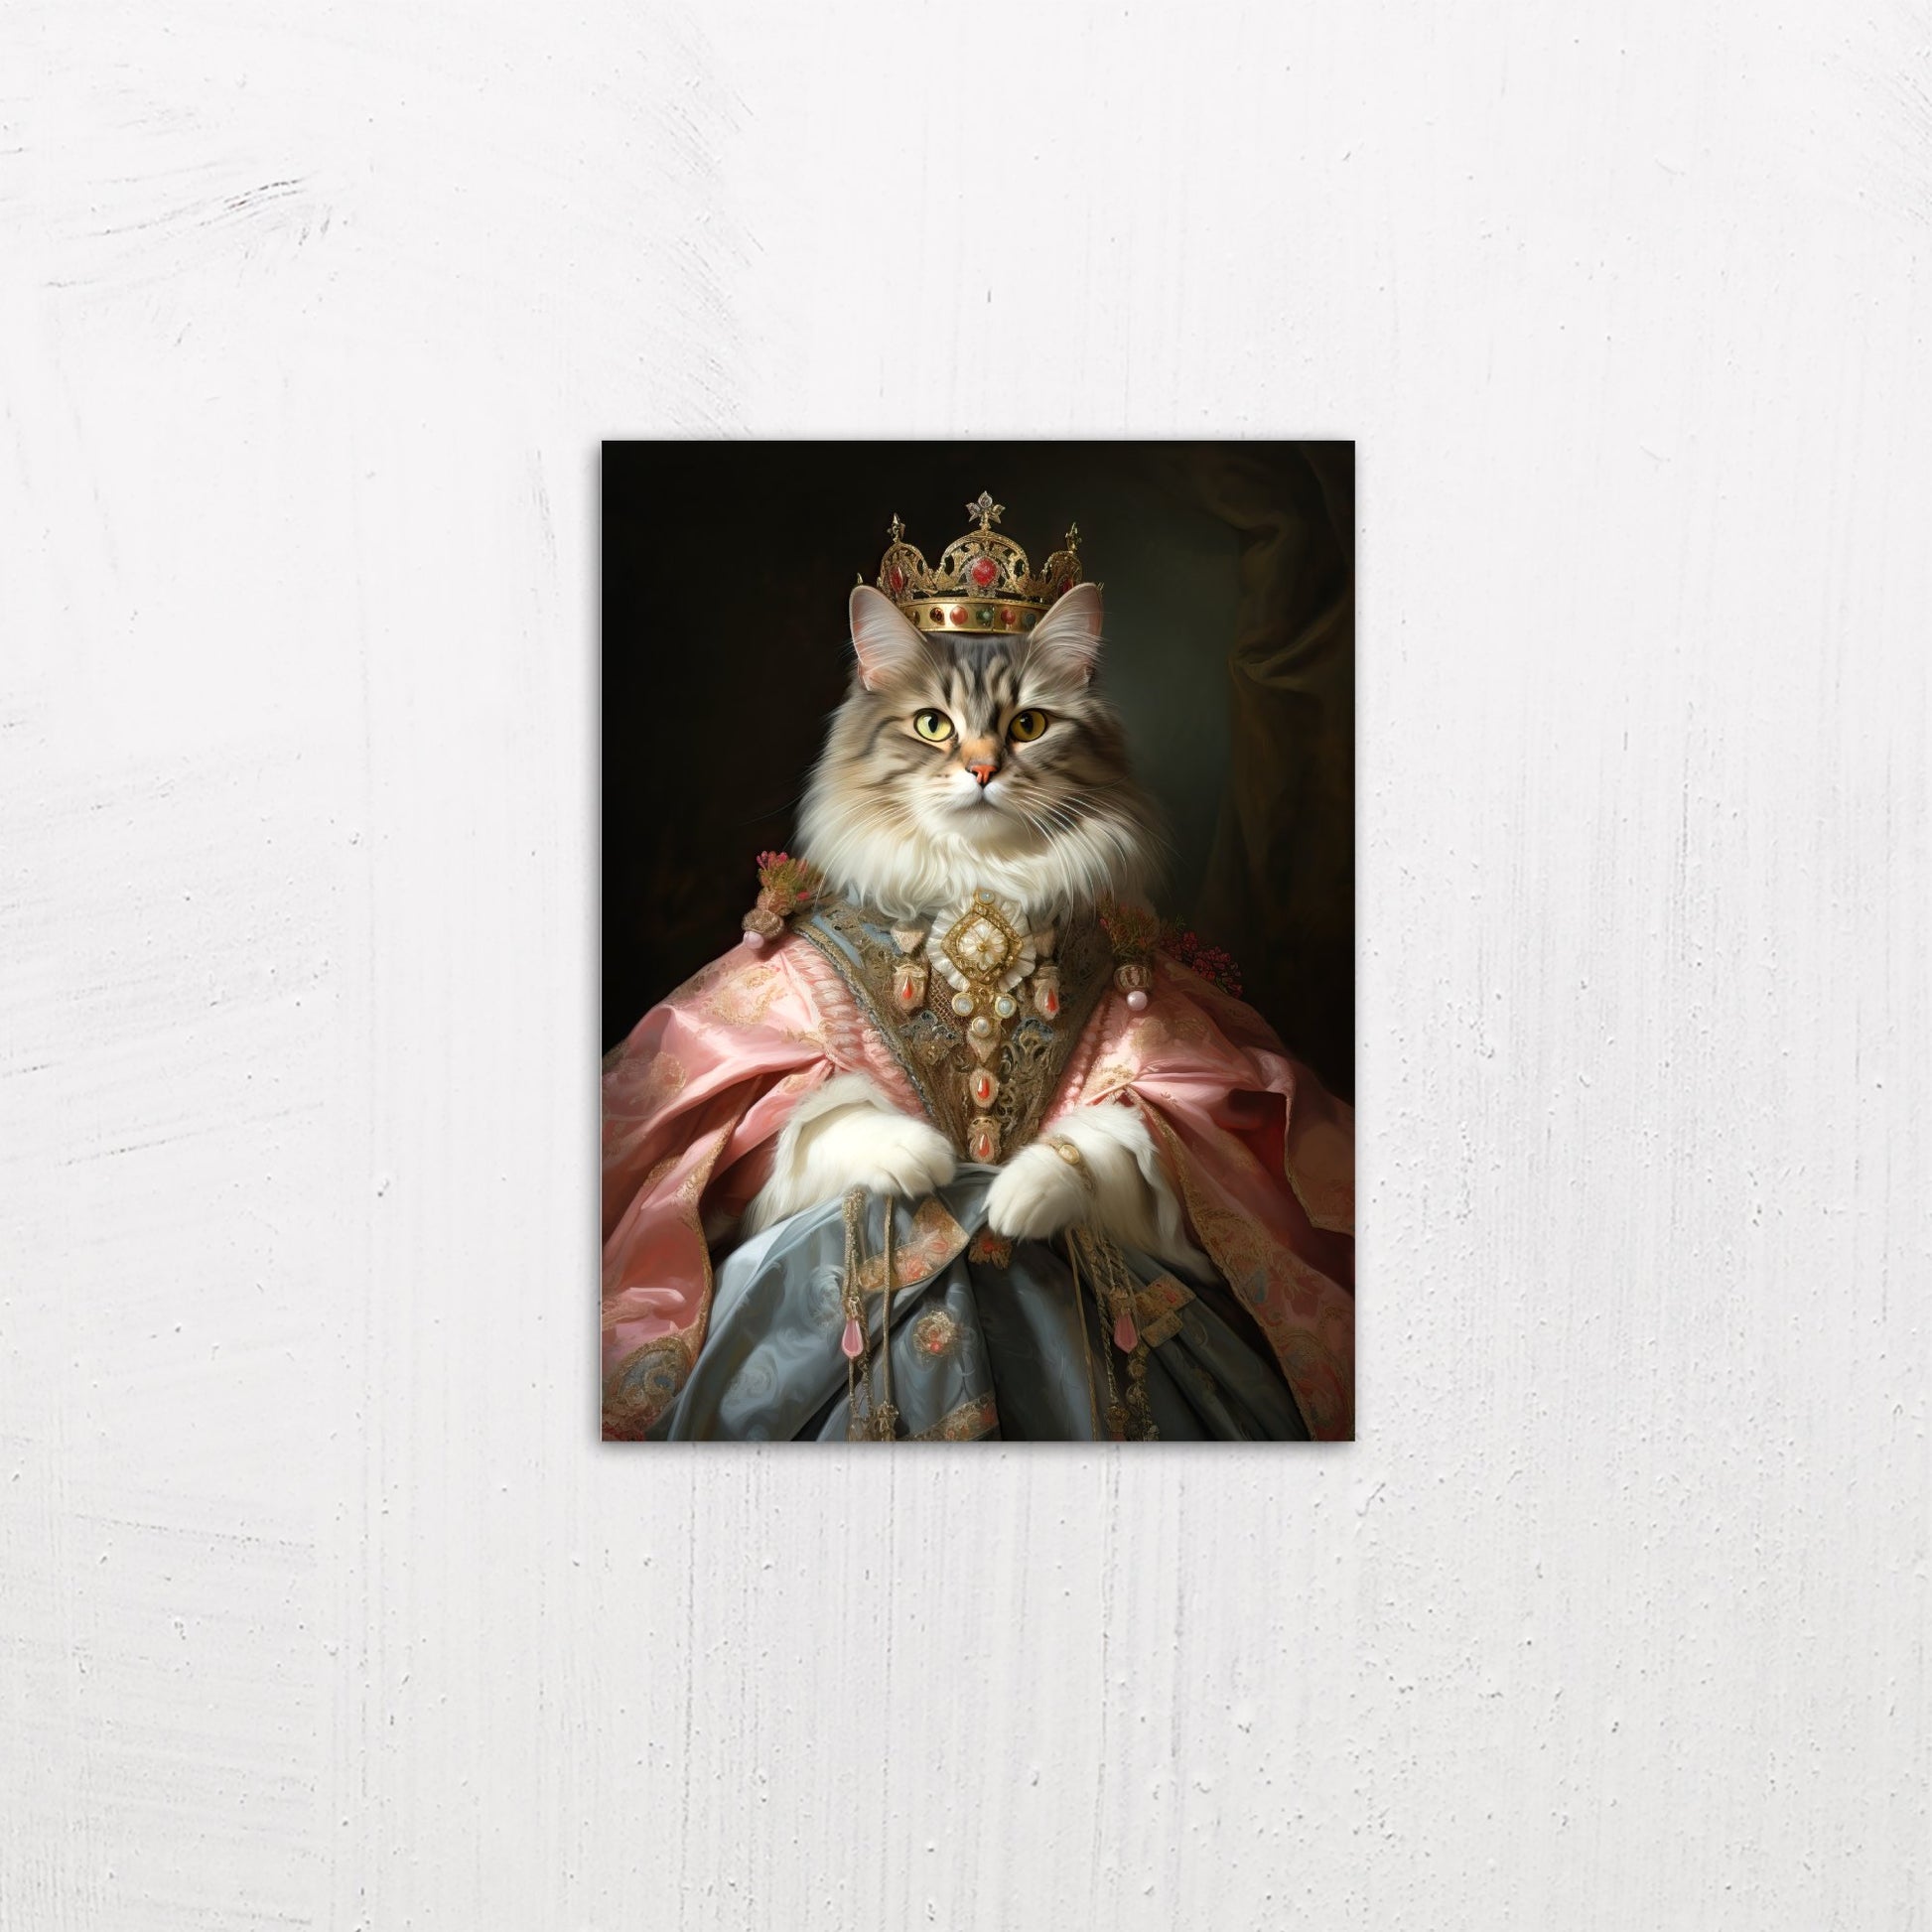 A small size metal art poster display plate with printed design of a Pet Portraits - Princess Kitty Painting